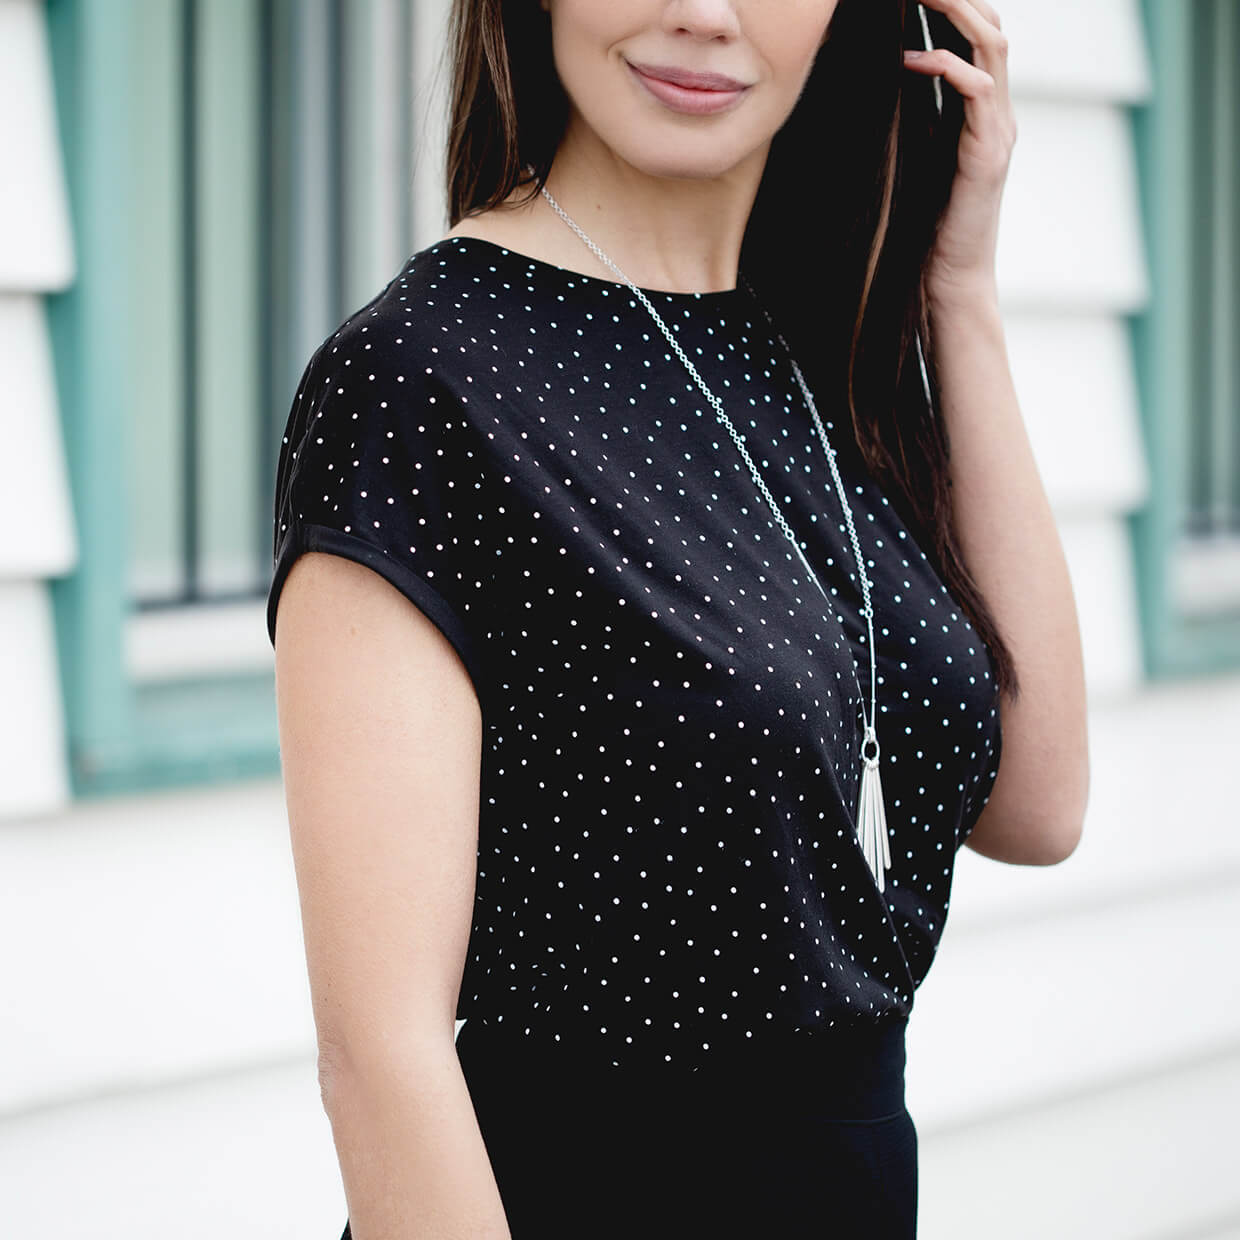 Silver Icing Flash Sale: The Versatility of a Polka Dot Top